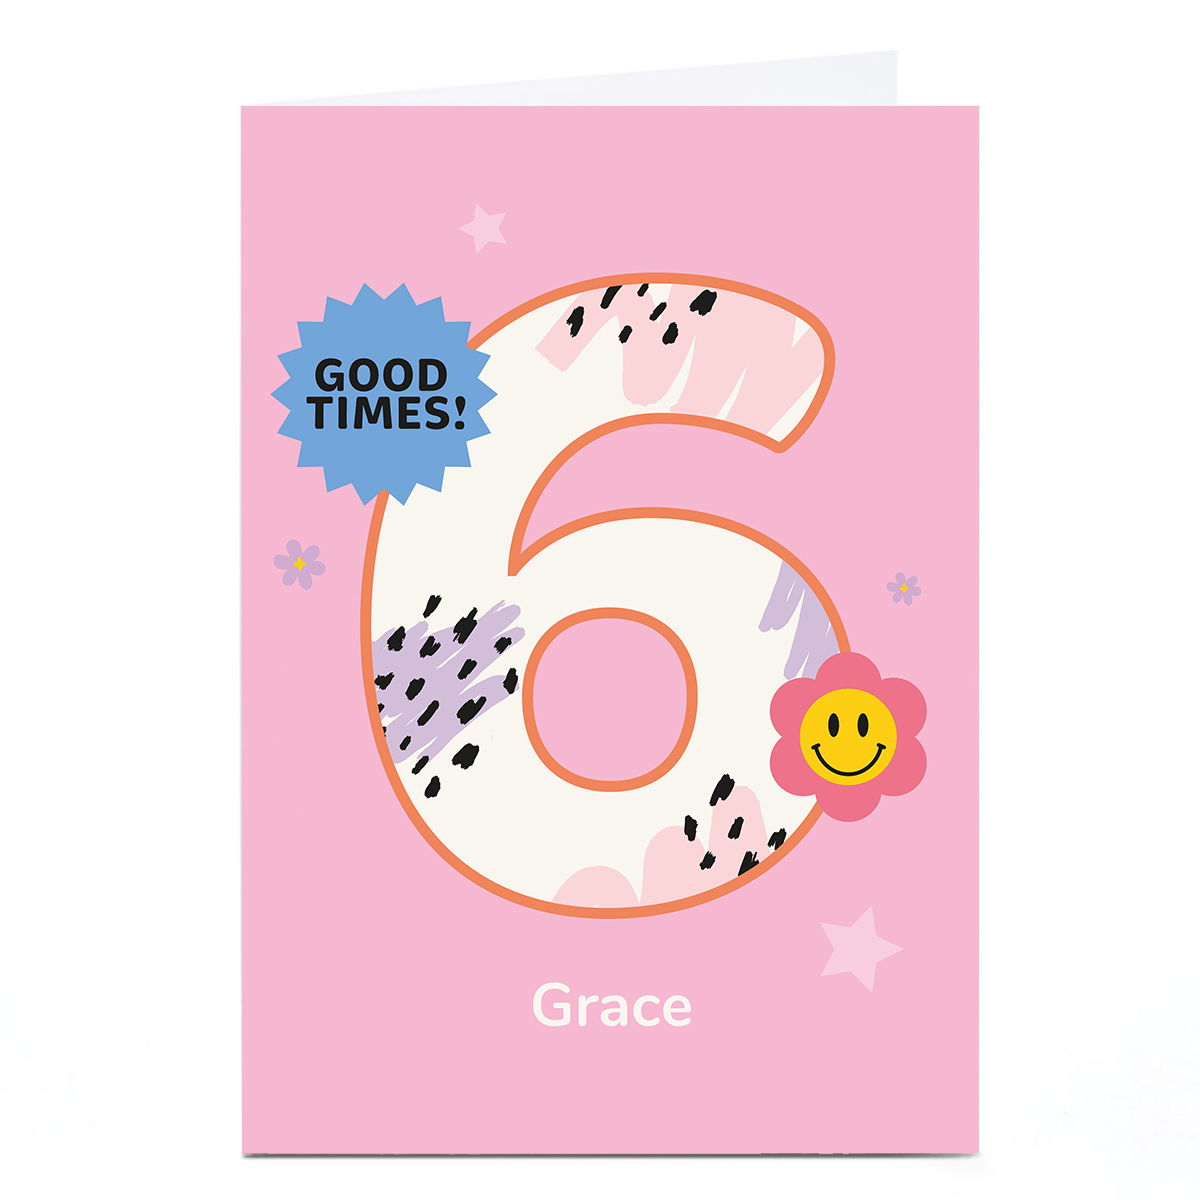 Personalised Frances Wilson 6th Birthday Card - Good Times Pink